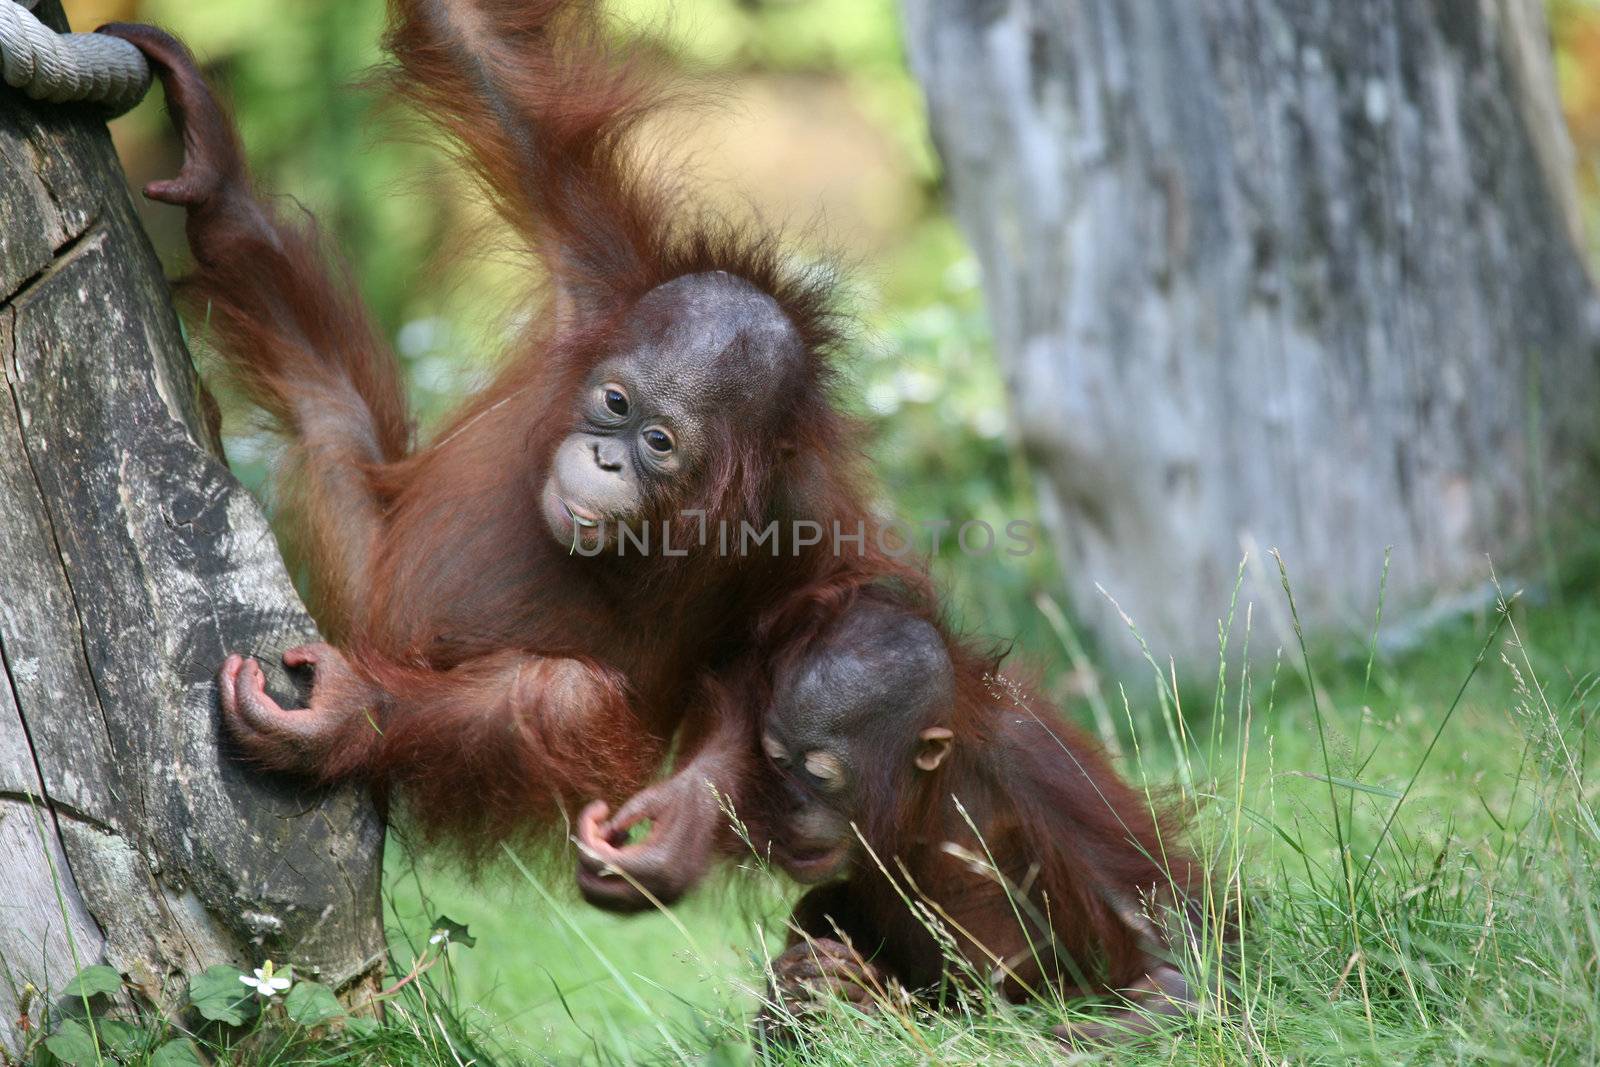 Playful young monkeys by Fotosmurf